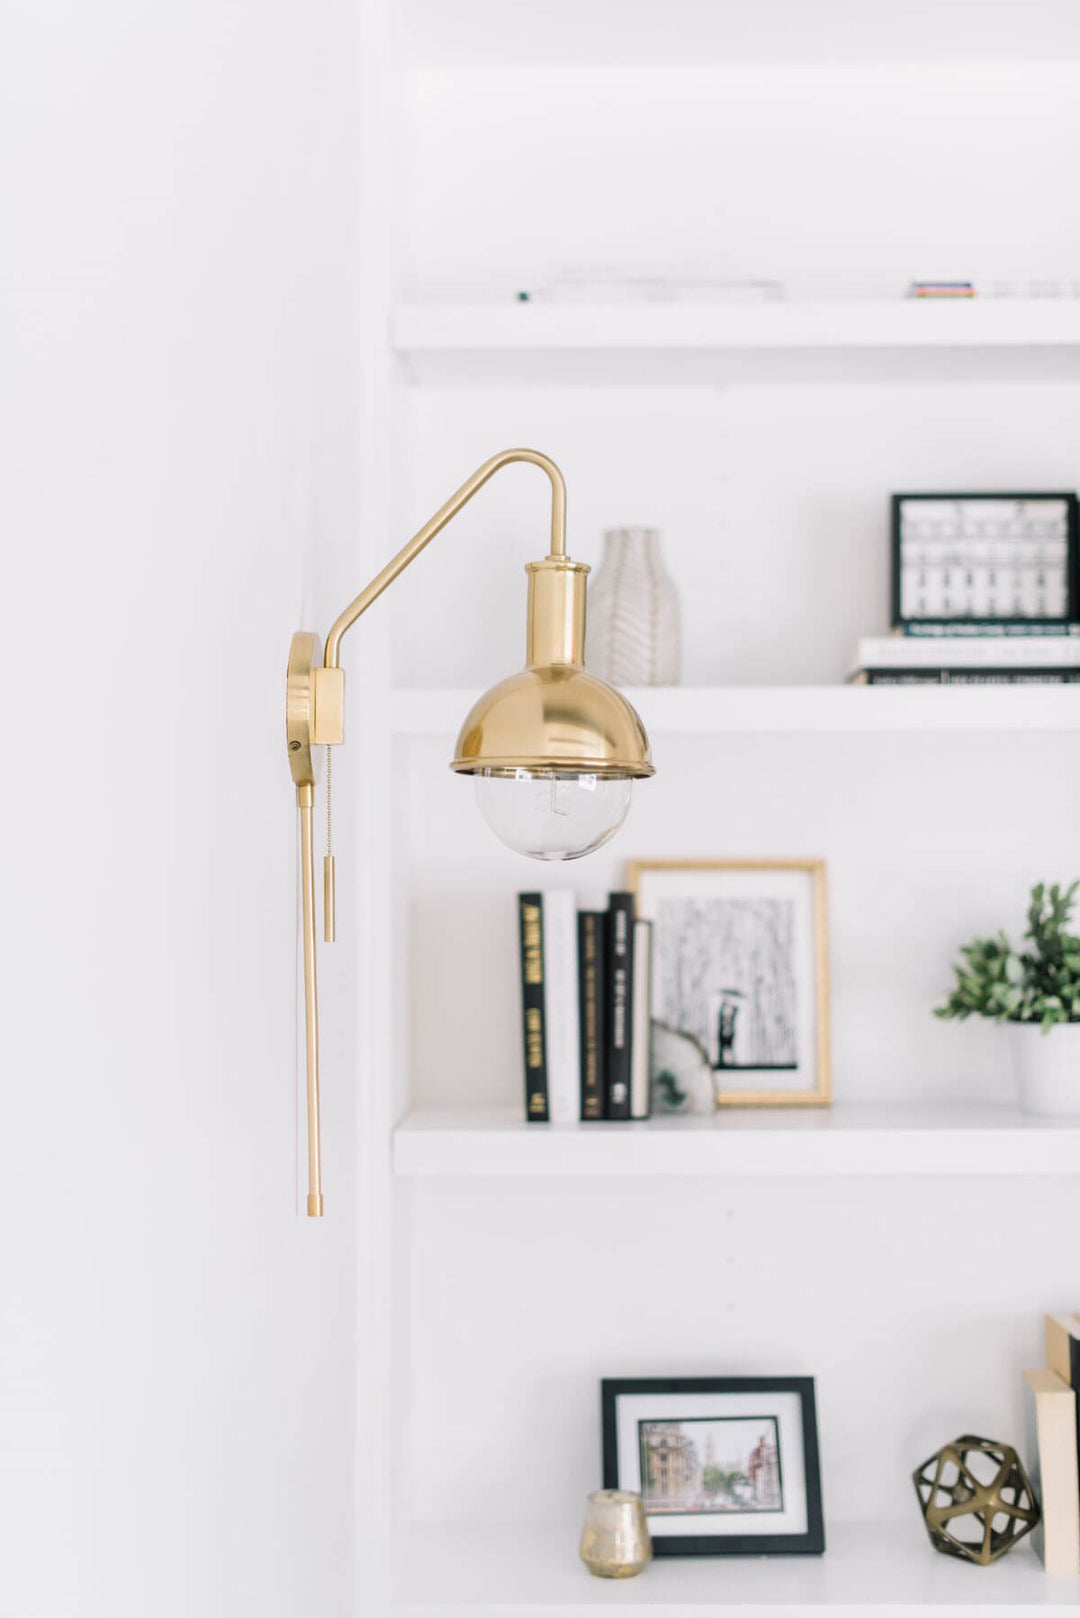 Aged brass wall sconce with adjustable arm in a white living room.